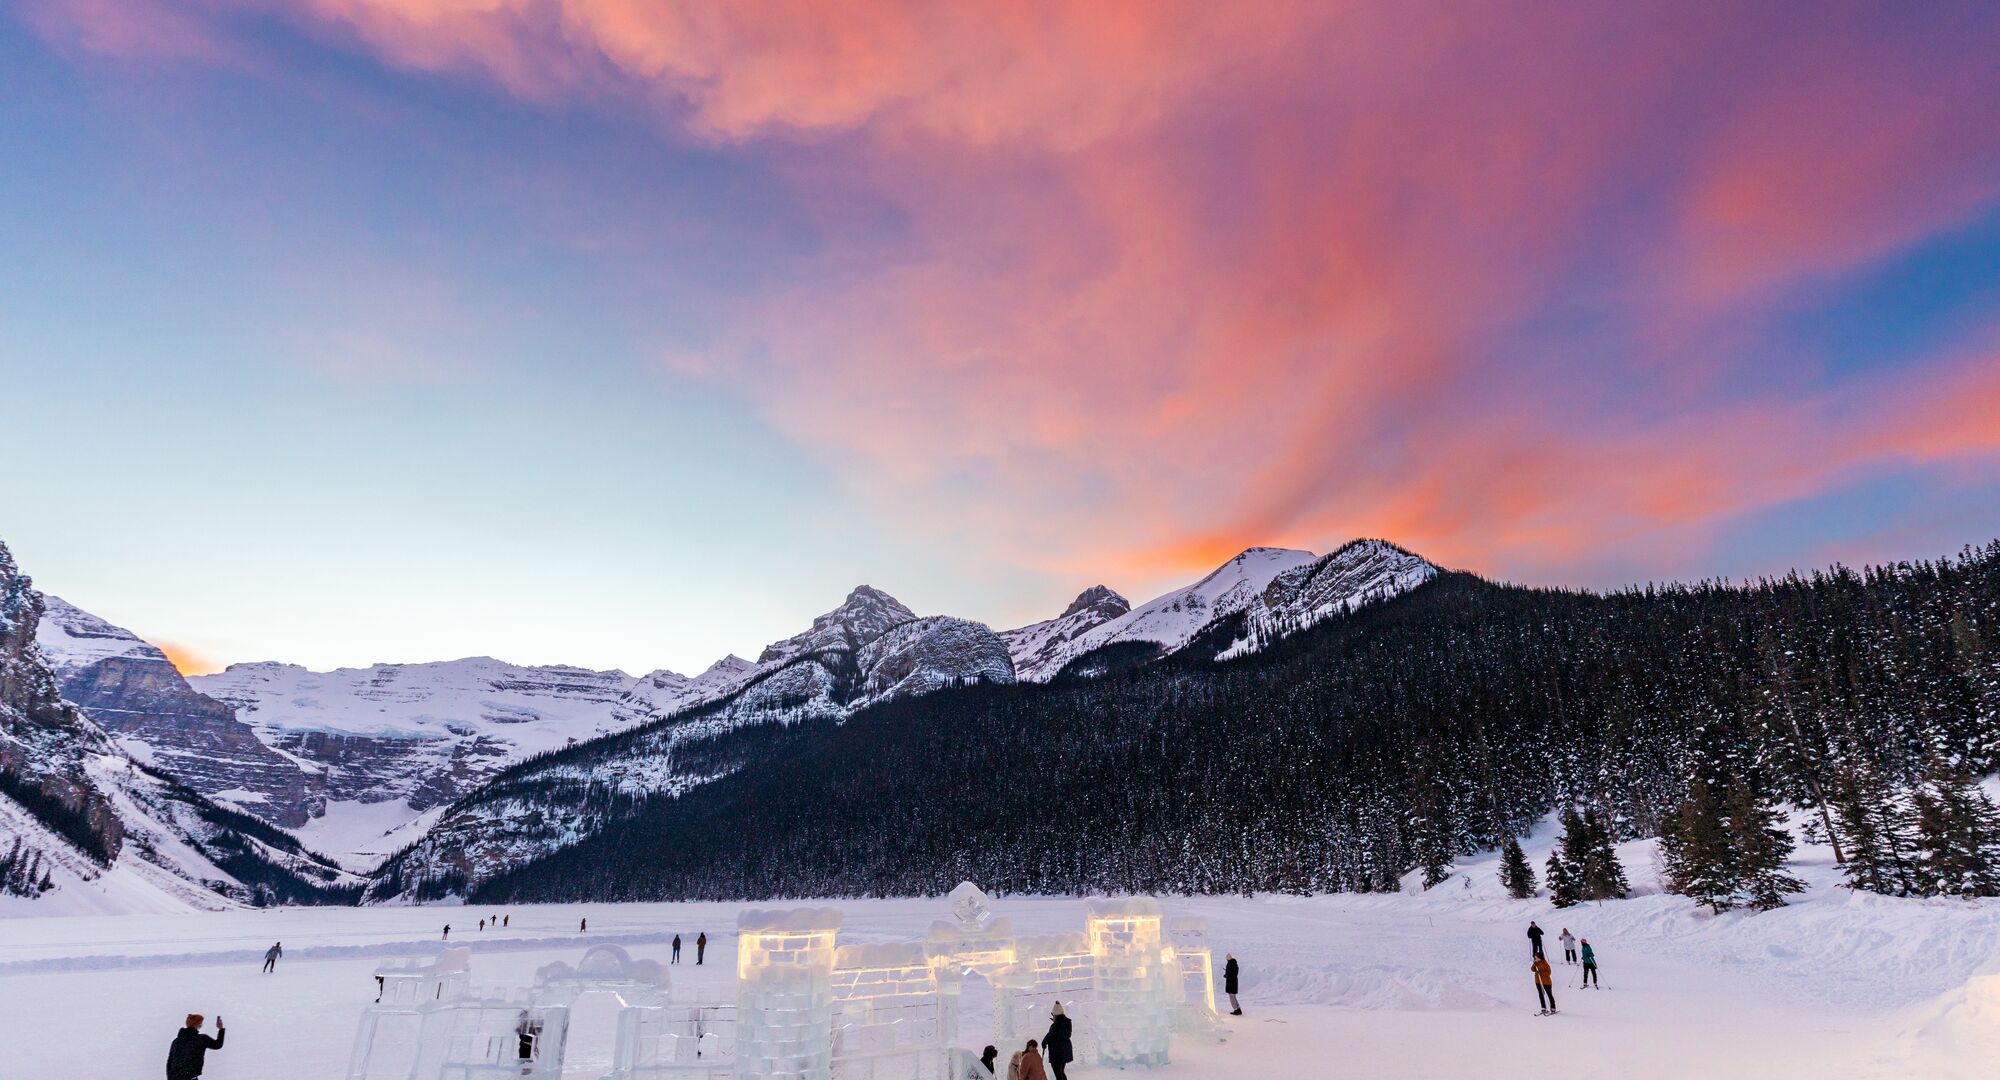 The skating rink and the ice castle underneath a red sunset at Lake Louise during Ice Magic in Banff National Park.